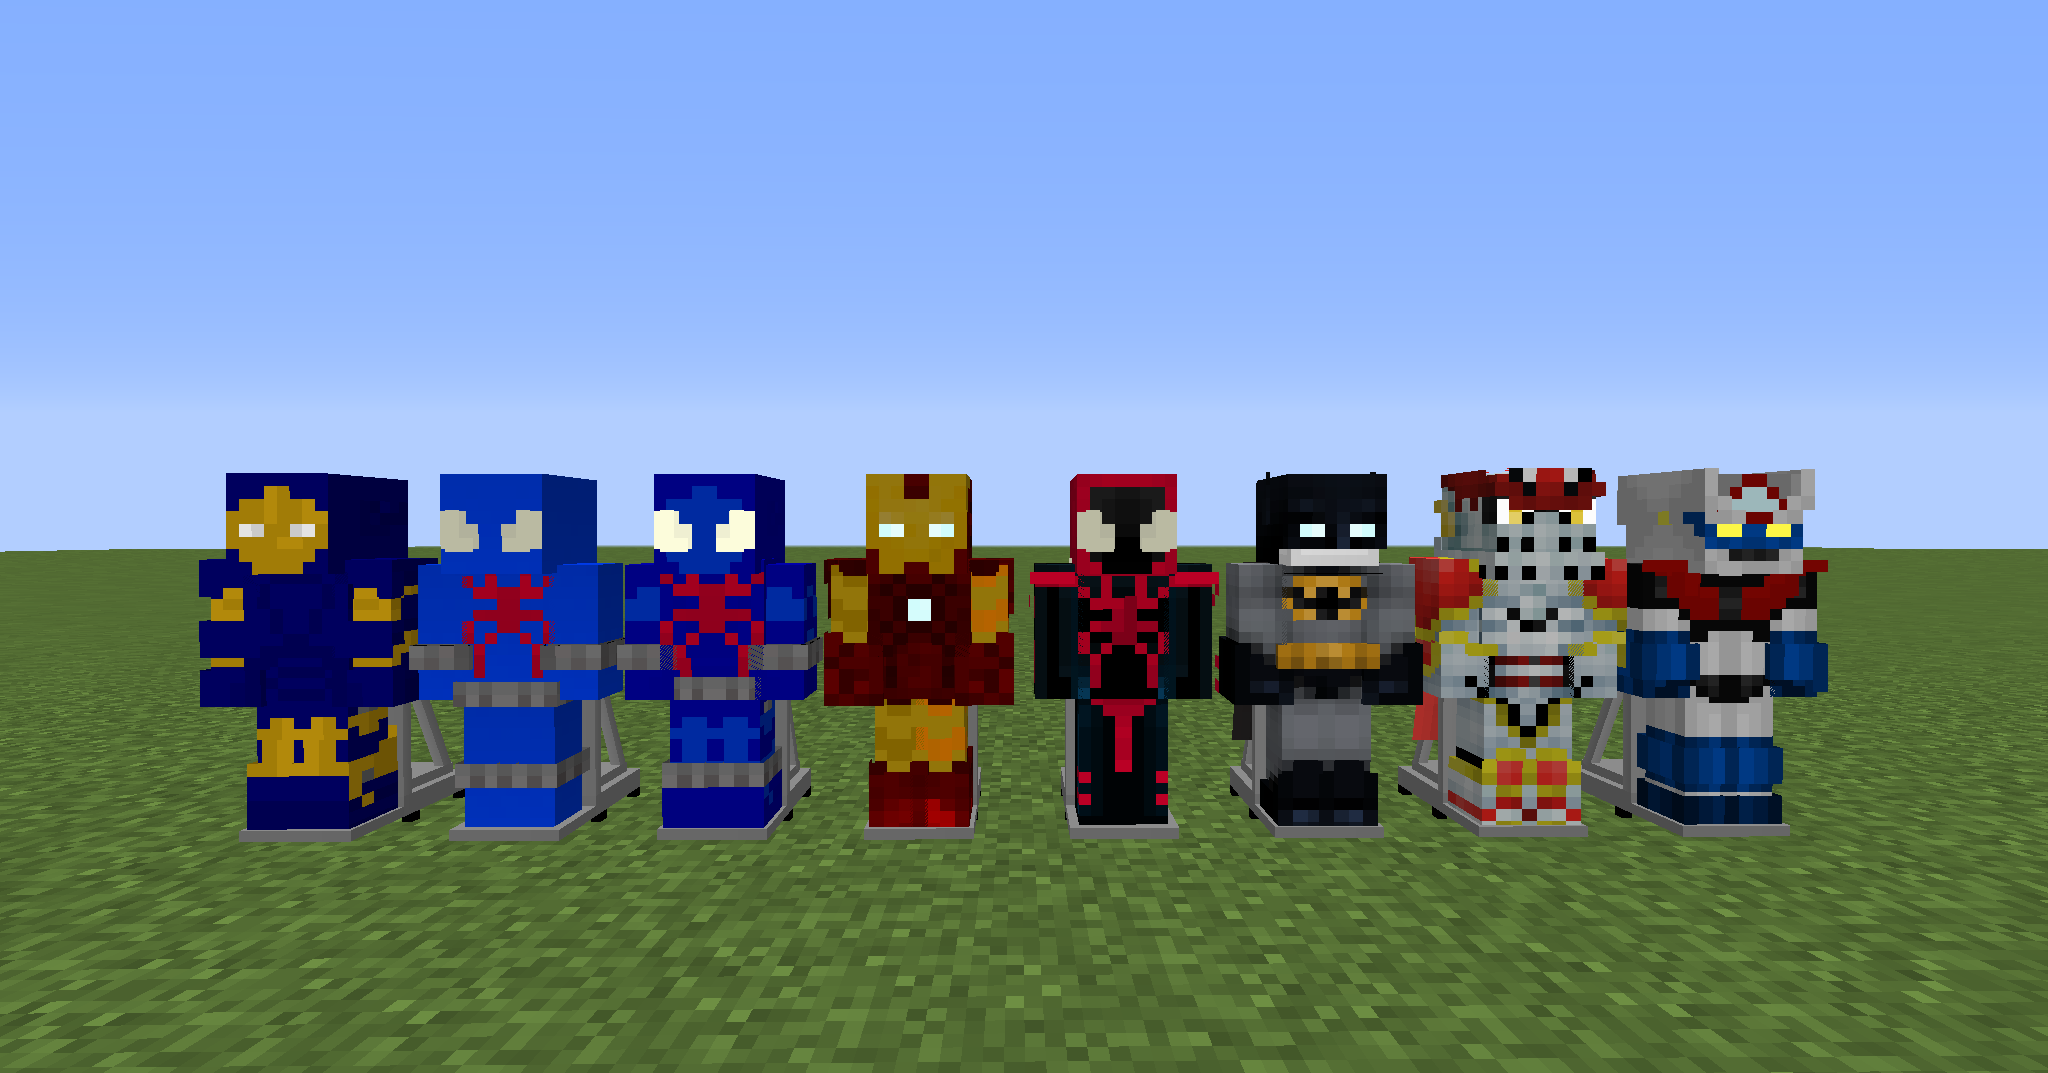 Fisk superheroes pack. Heroes Expansion Mod 1.12.2. Аддон на Heroes Expansion 1.12.2. Lucraft Core Mod 1.12.2. Мод Heroes Expansion.